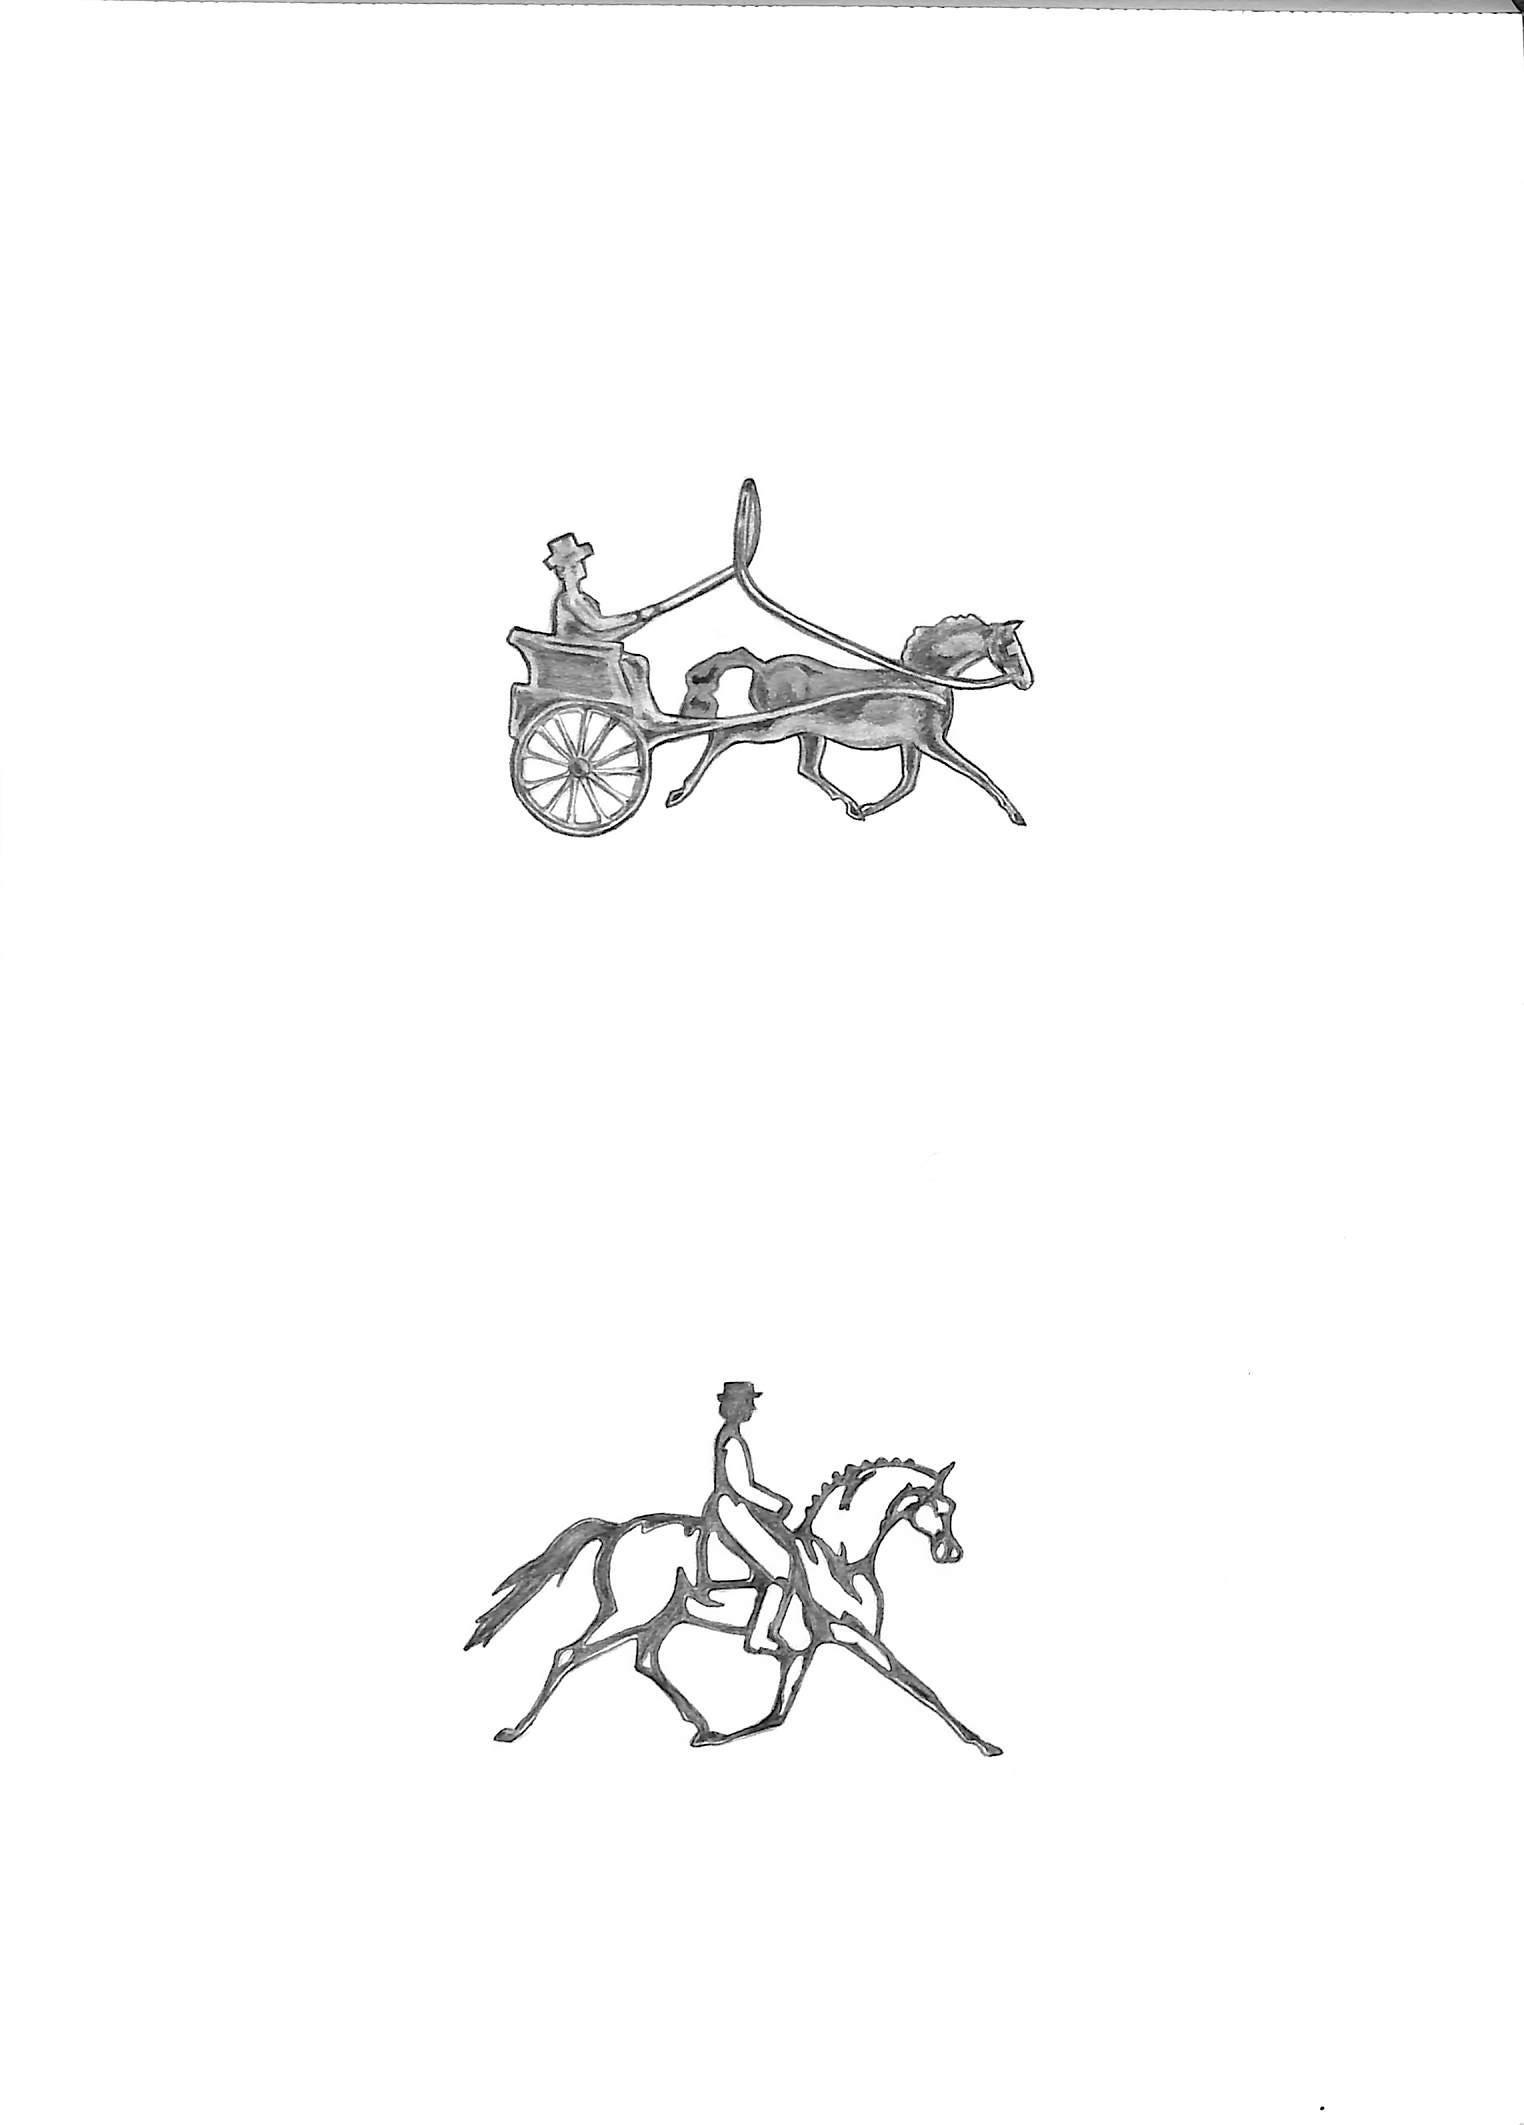 Gold Driving Pendant/ Dressage Horse & Rider Pin Graphite Drawing - Art by Unknown